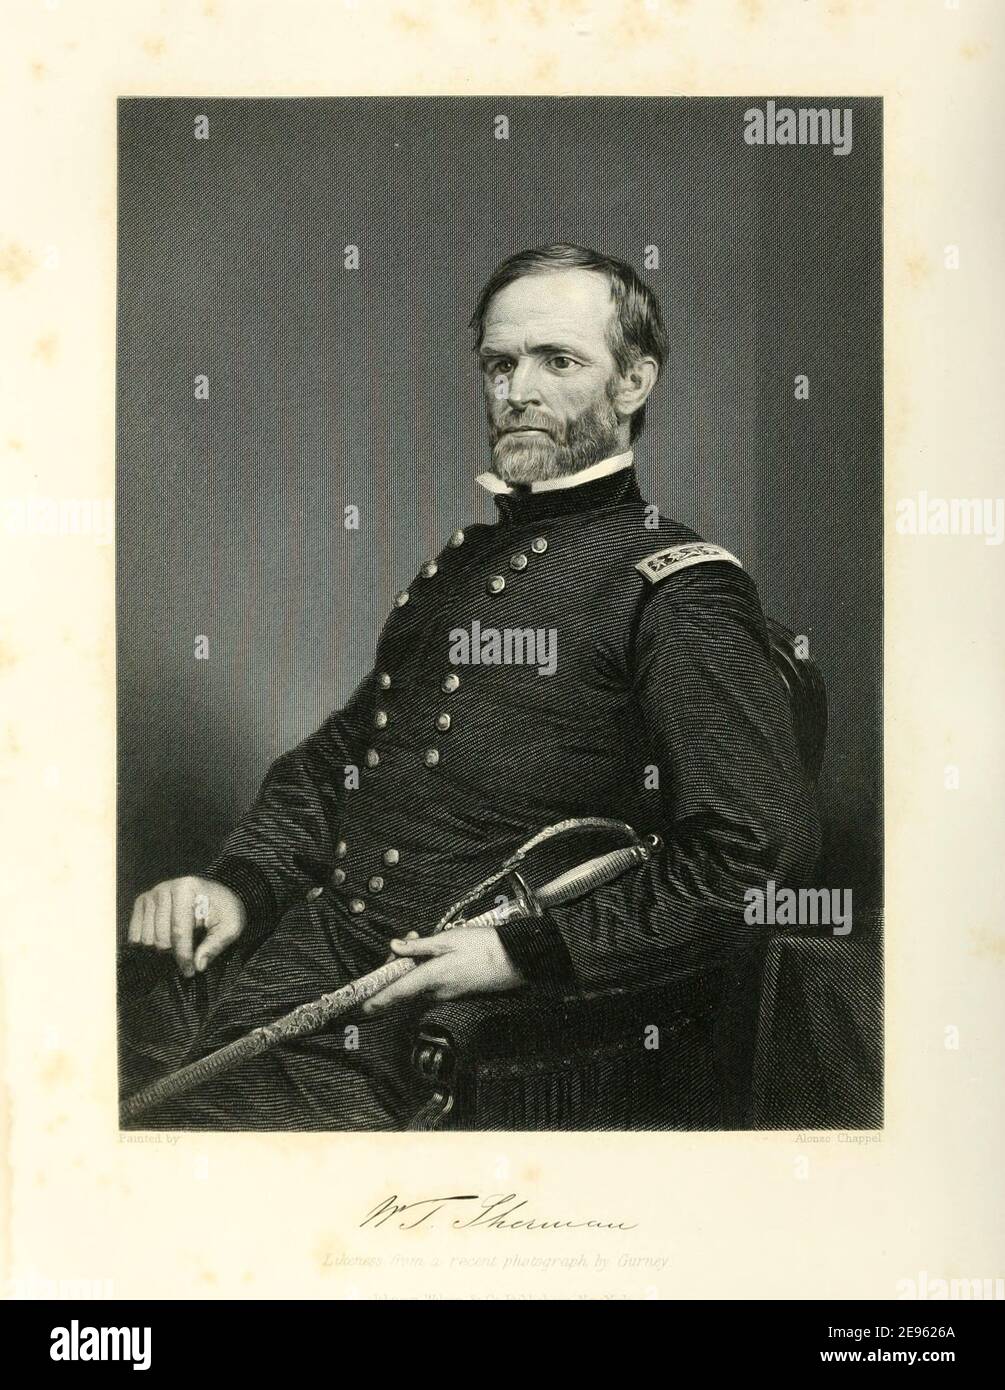 Engraved portrait based on a photograph of American Civil War General William Tecumseh Sherman (1820 - 1891), 1873. Photography by Jeremiah Gurney (1812 - 1895). Stock Photo